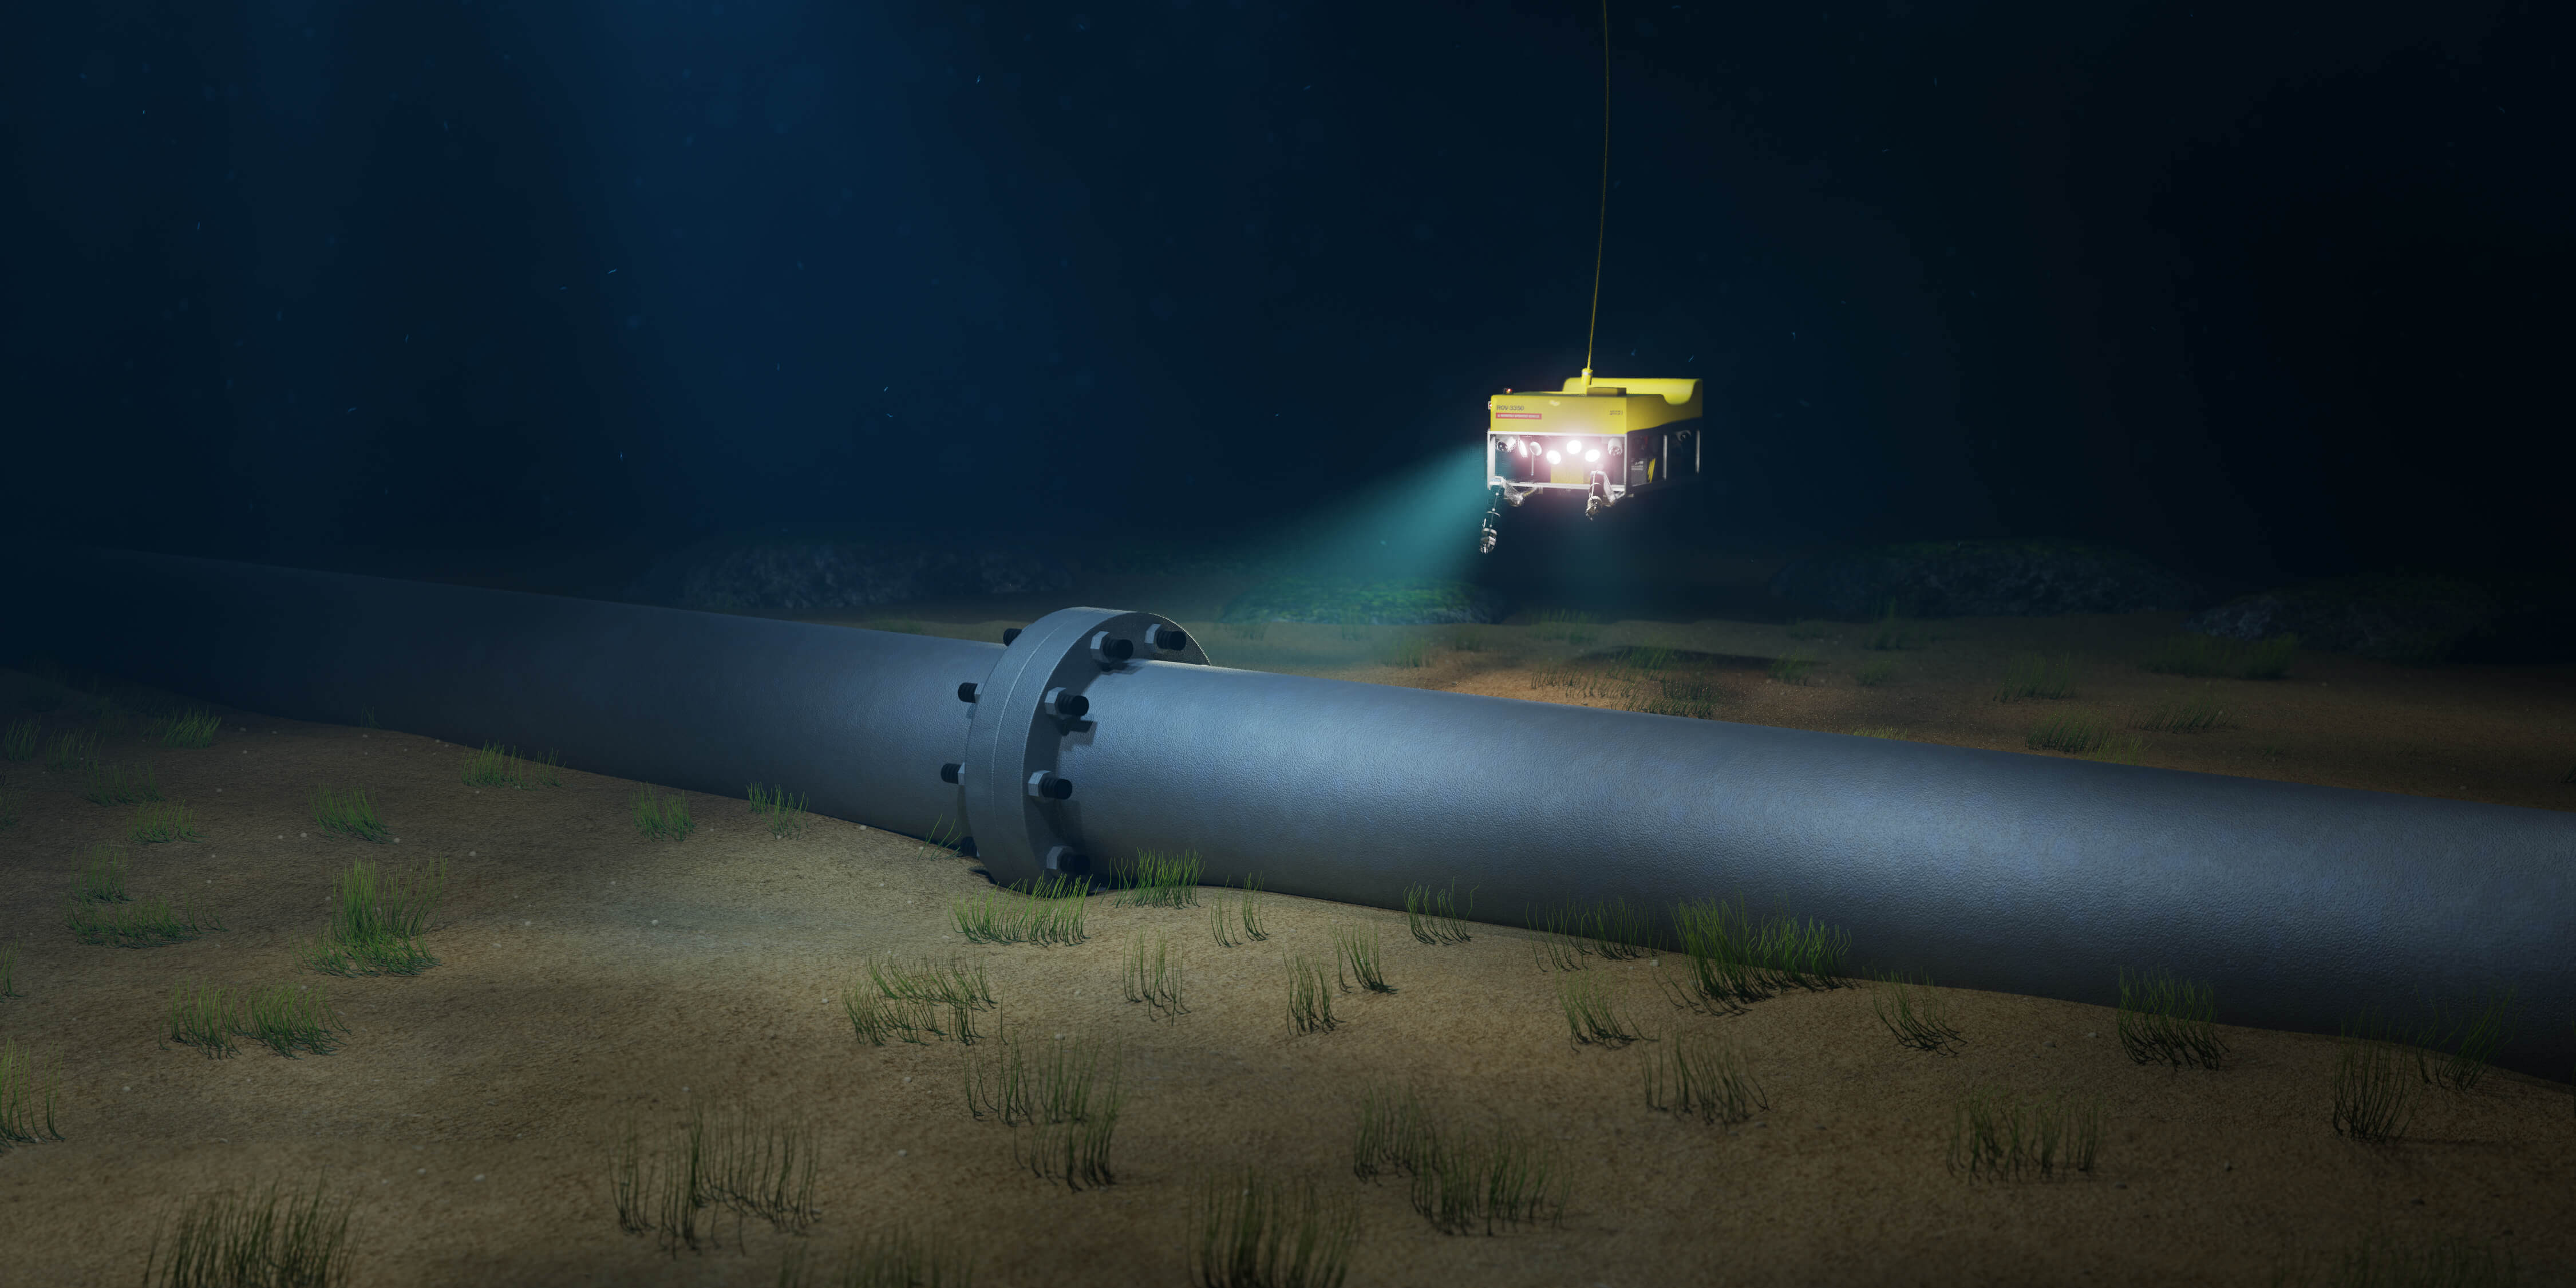 Remote device inspecting a subsea pipeline